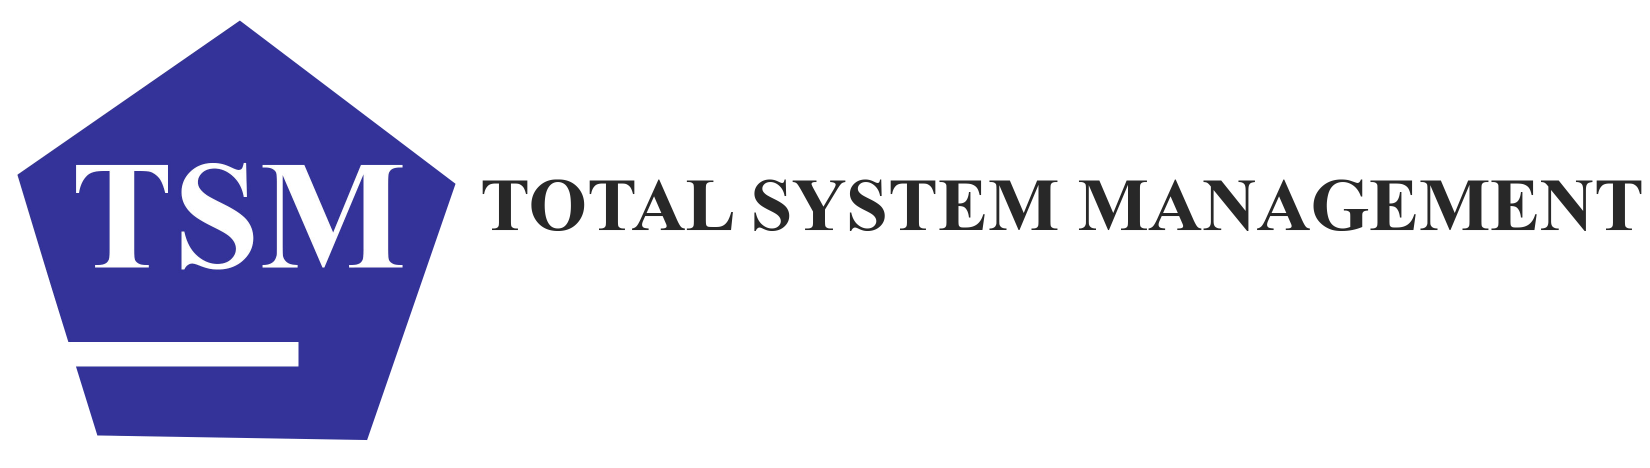 More about Total System Management SDN BHD